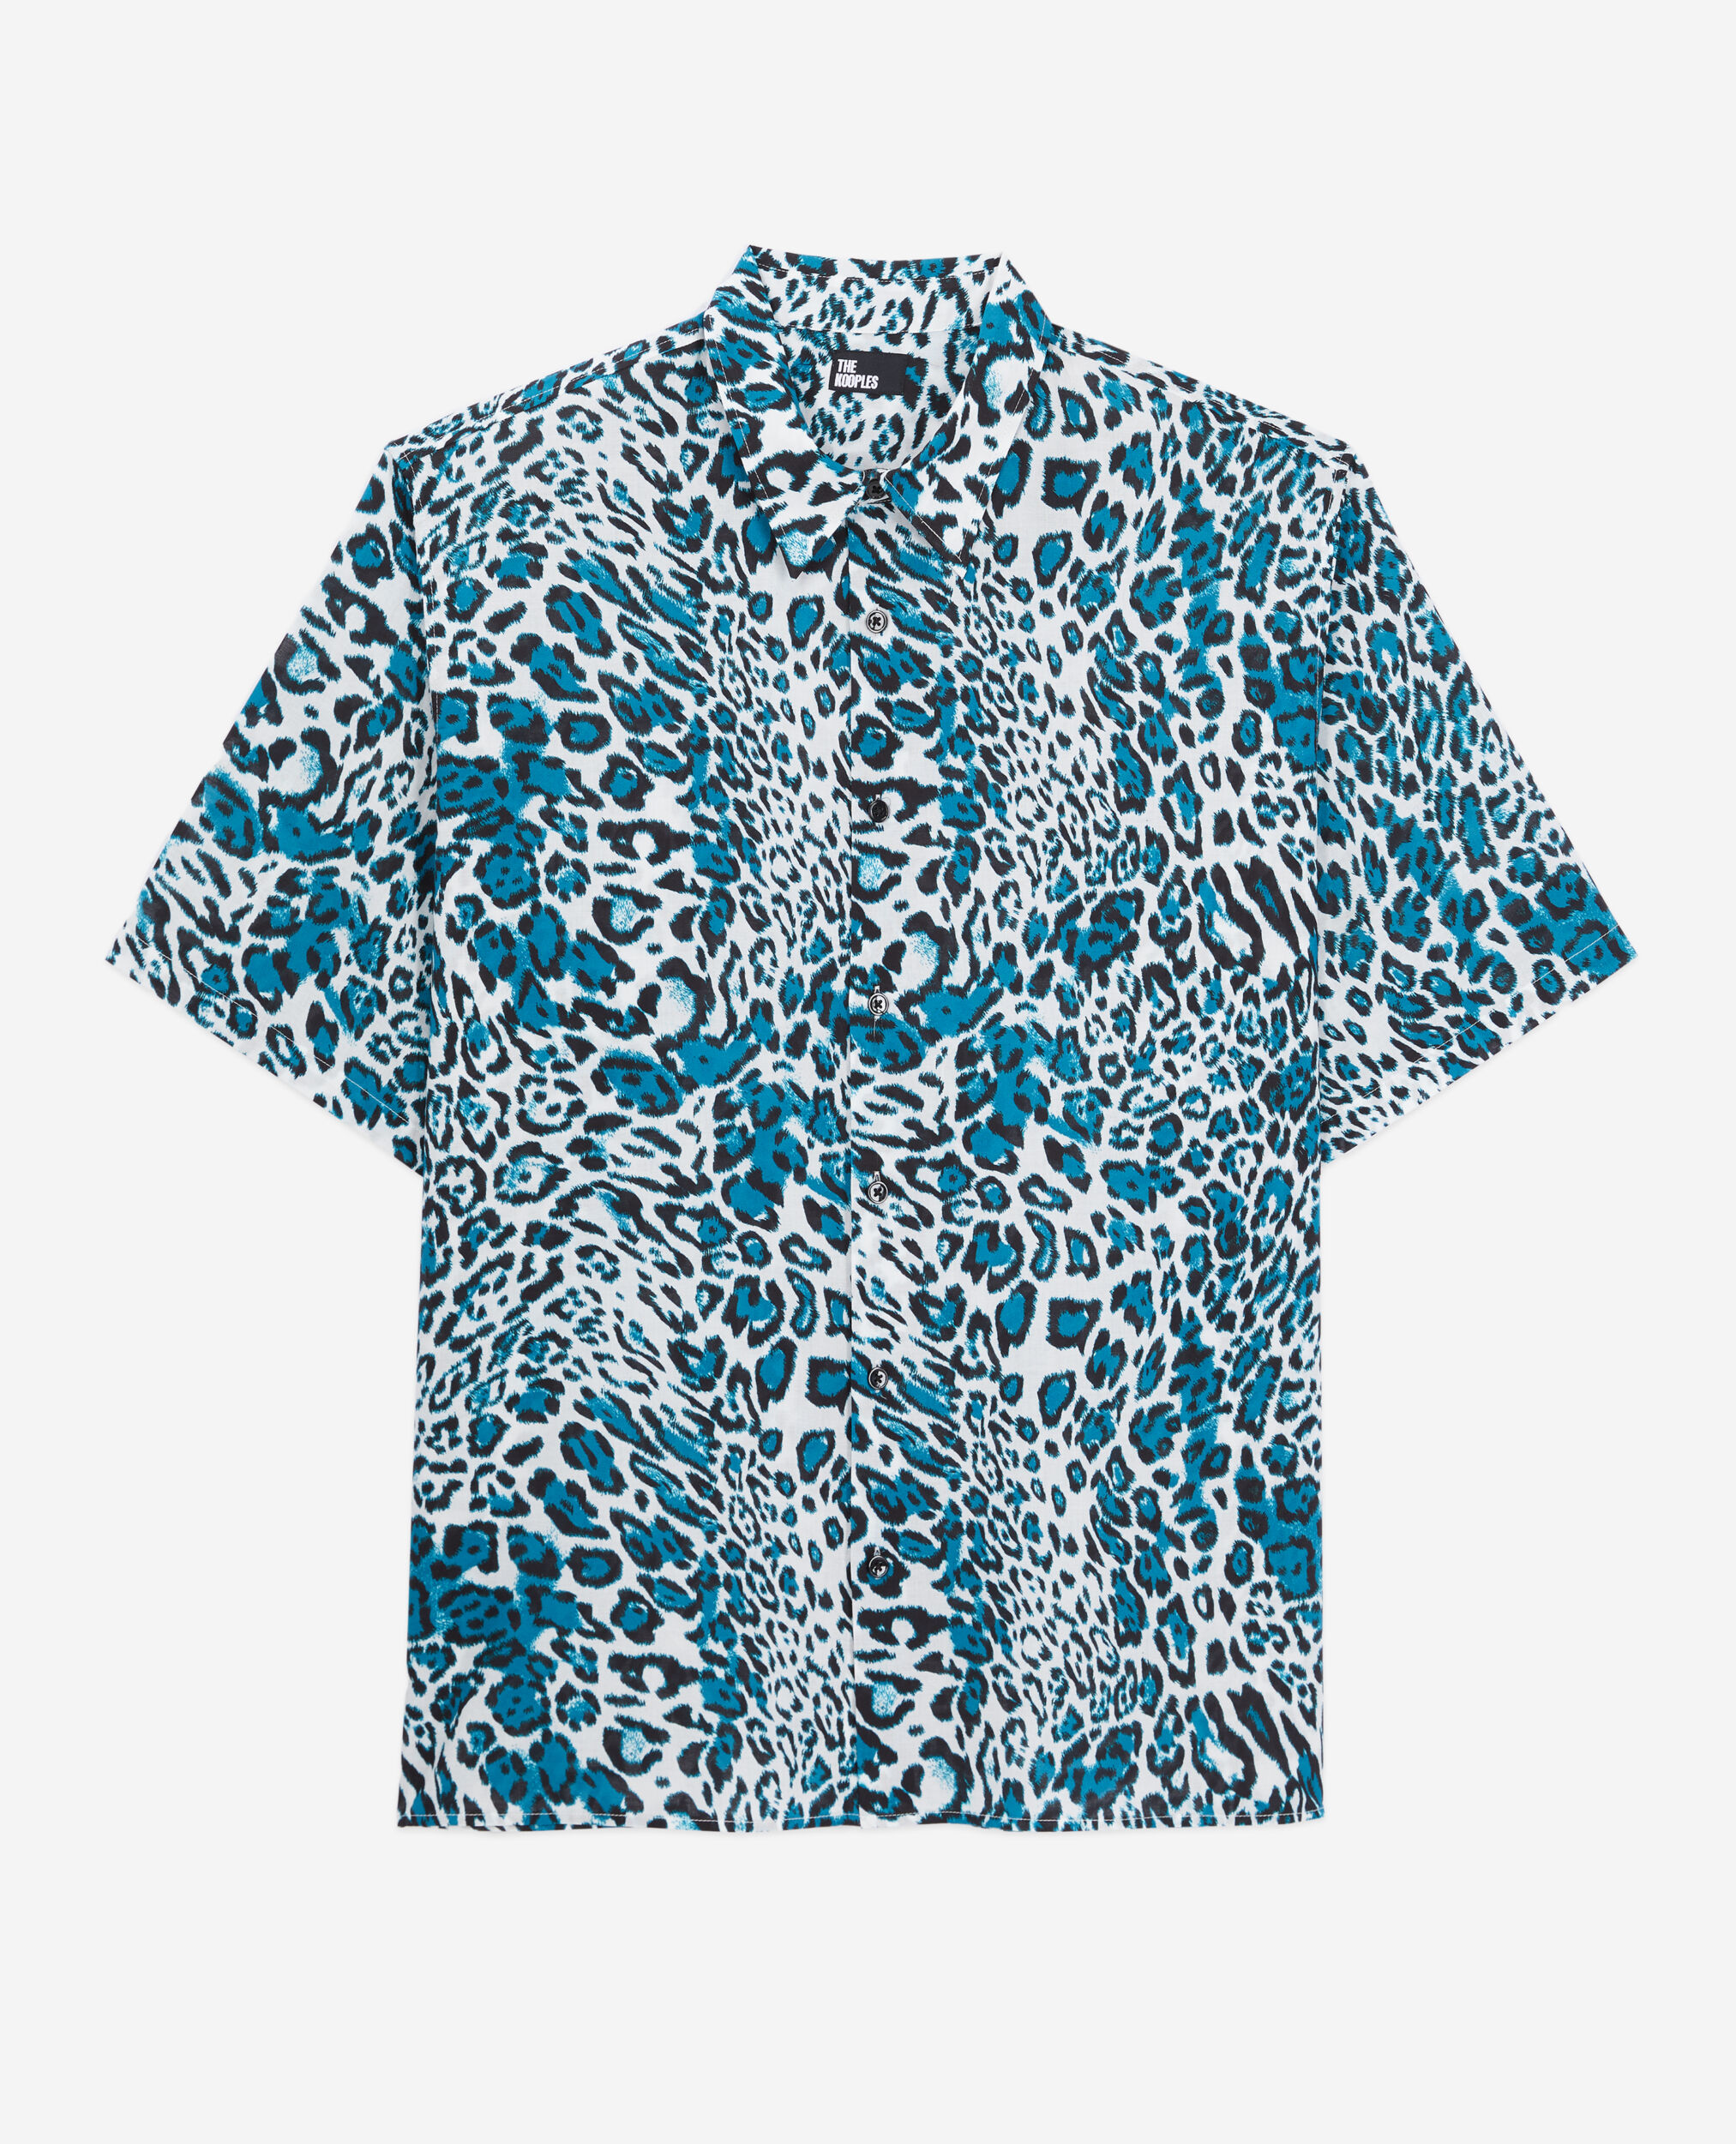 Printed cotton short sleeved shirt, BLUE WHITE, hi-res image number null